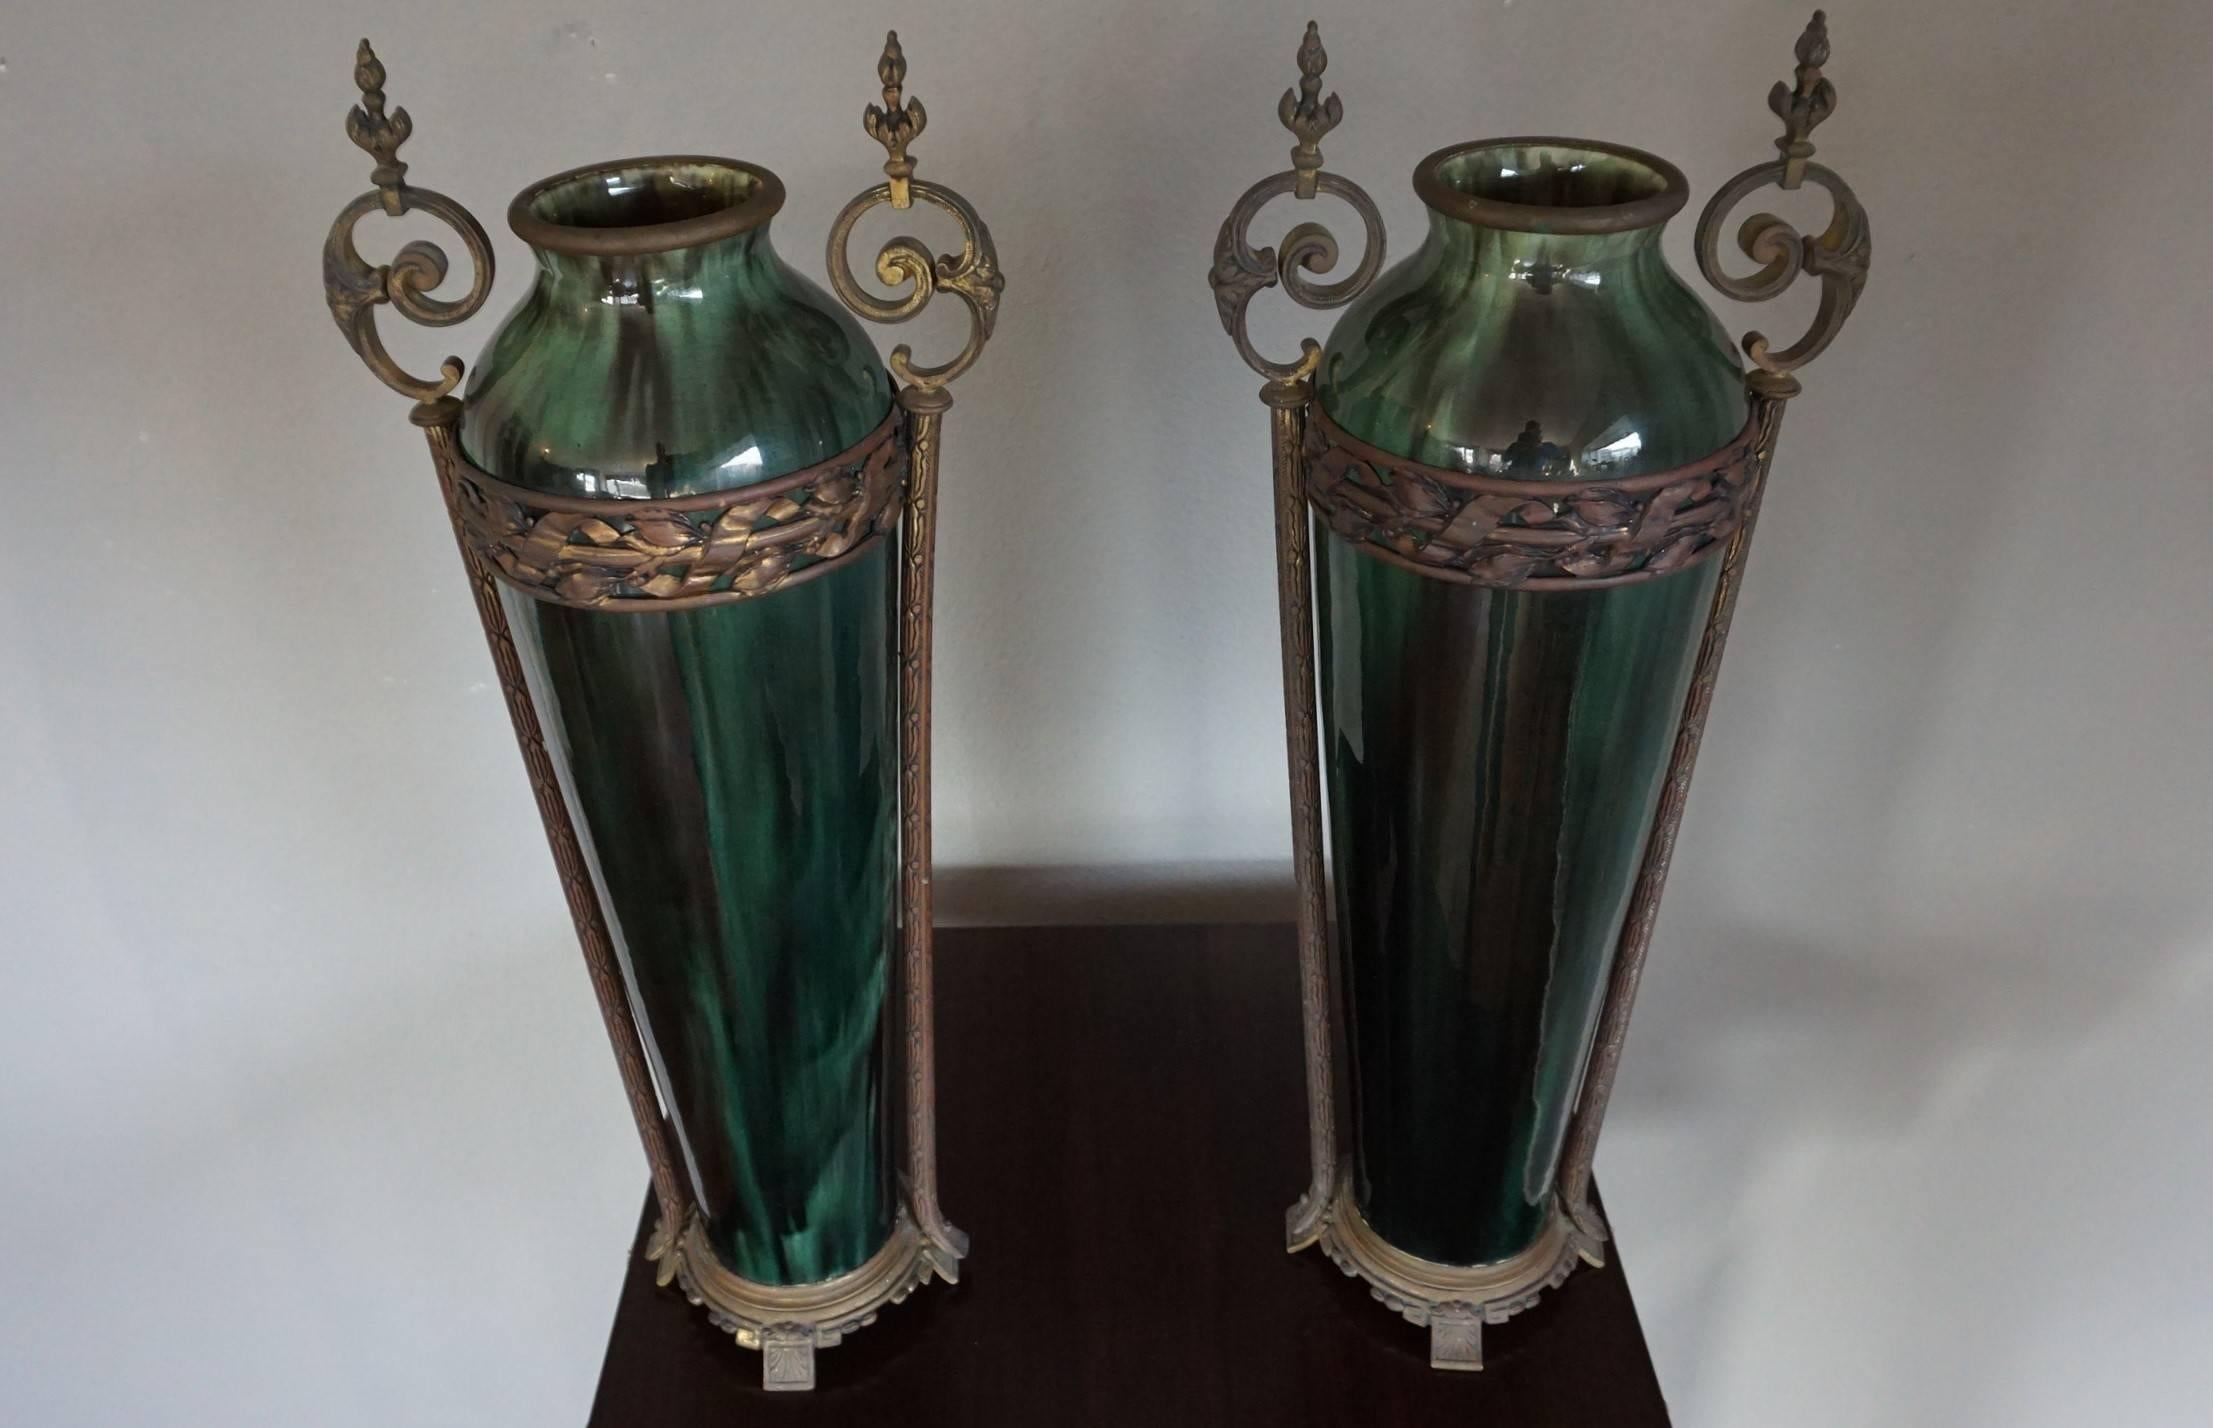 Large pair of 19th century, top quality vases.

If you are looking for 19th century, European grandeur then these antique French vases may be perfect for your home. The design and the craftsmanship that went into creating these sizable vases makes